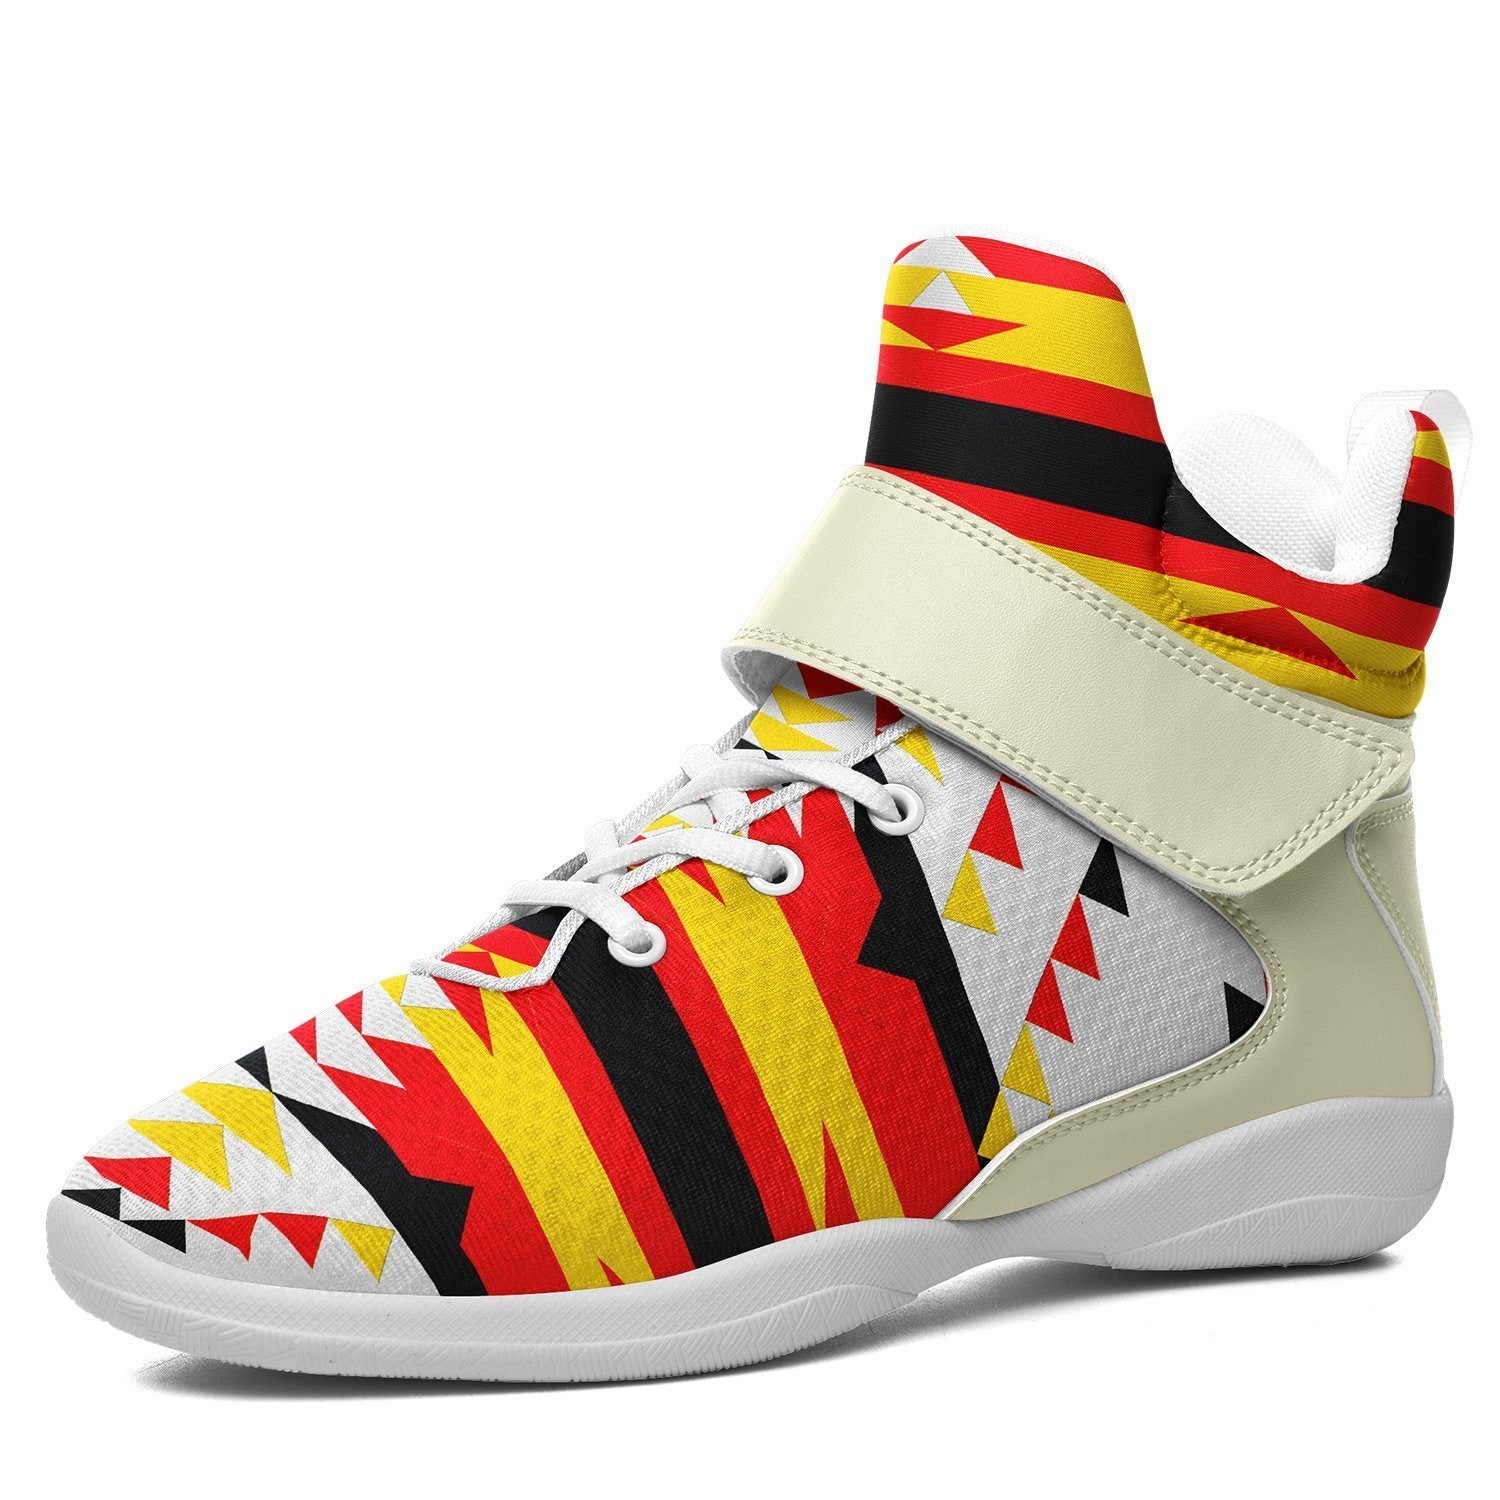 Visions of Peace Directions Ipottaa Basketball / Sport High Top Shoes - White Sole 49 Dzine US Men 7 / EUR 40 White Sole with Cream Strap 